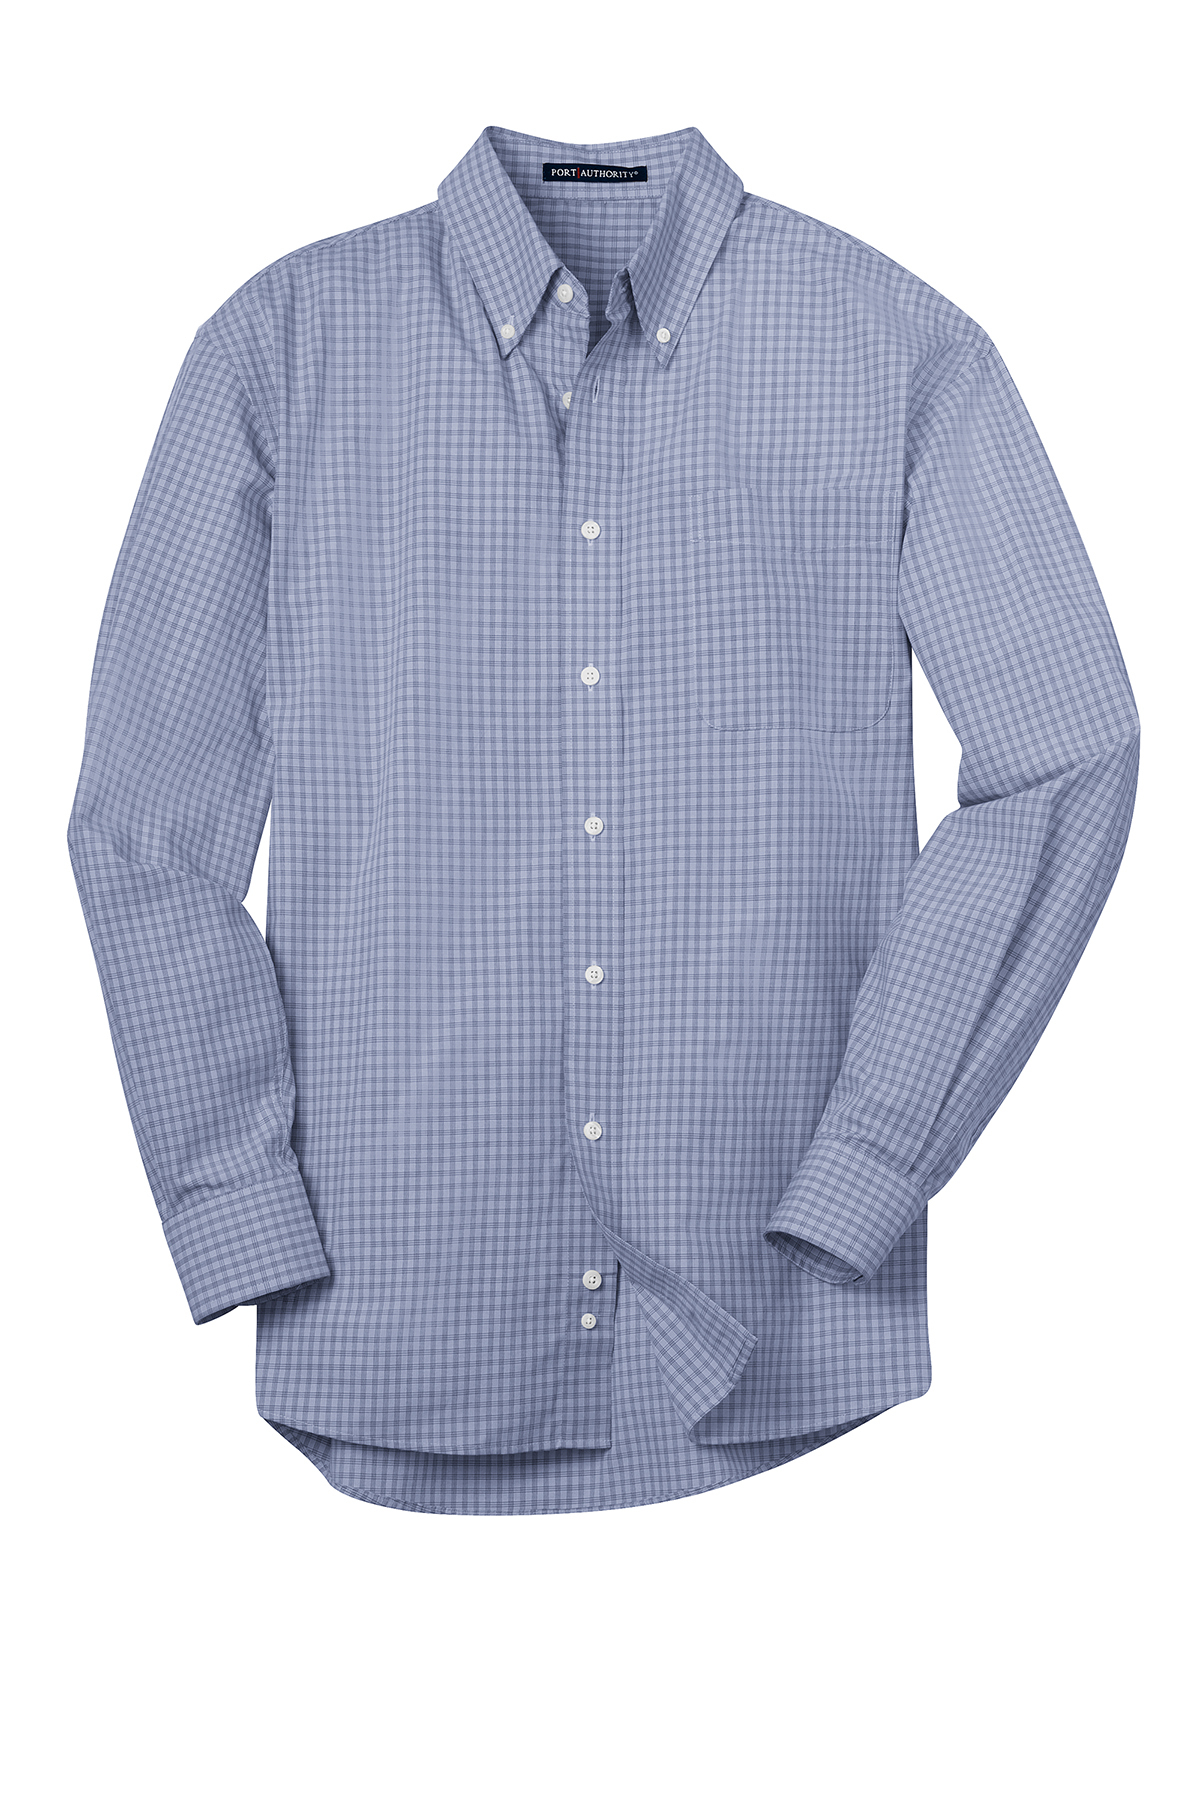 Port Authority Plaid Pattern Easy Care Shirt | Product | Port Authority